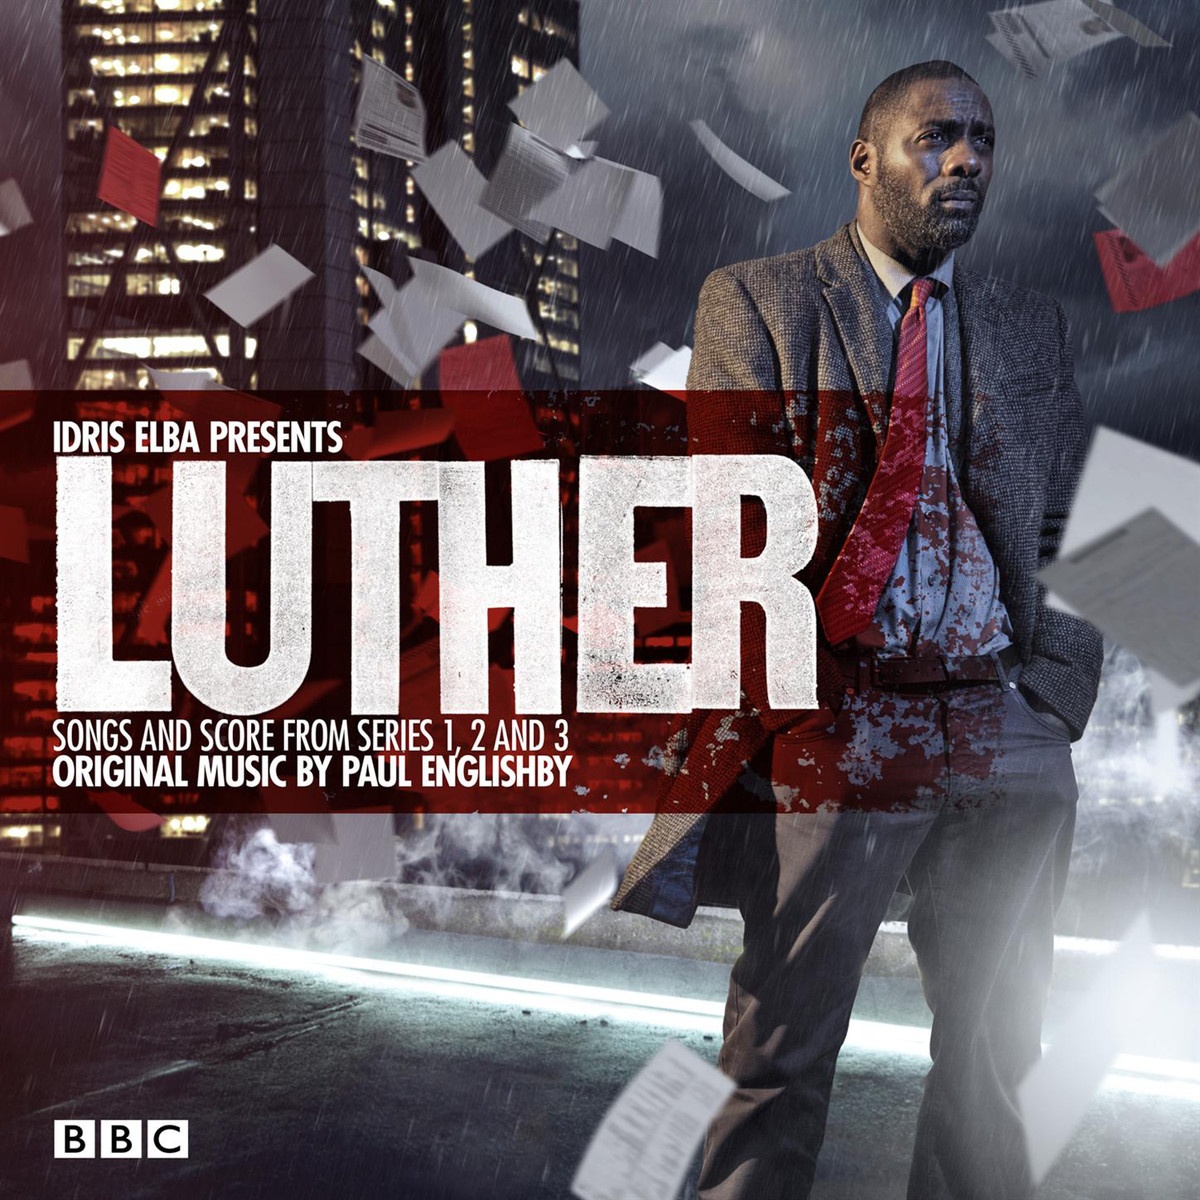 Luther (Soundtrack from the Television Series) [Idris Elba Presents Songs and Score from Series 1, 2 and 3]